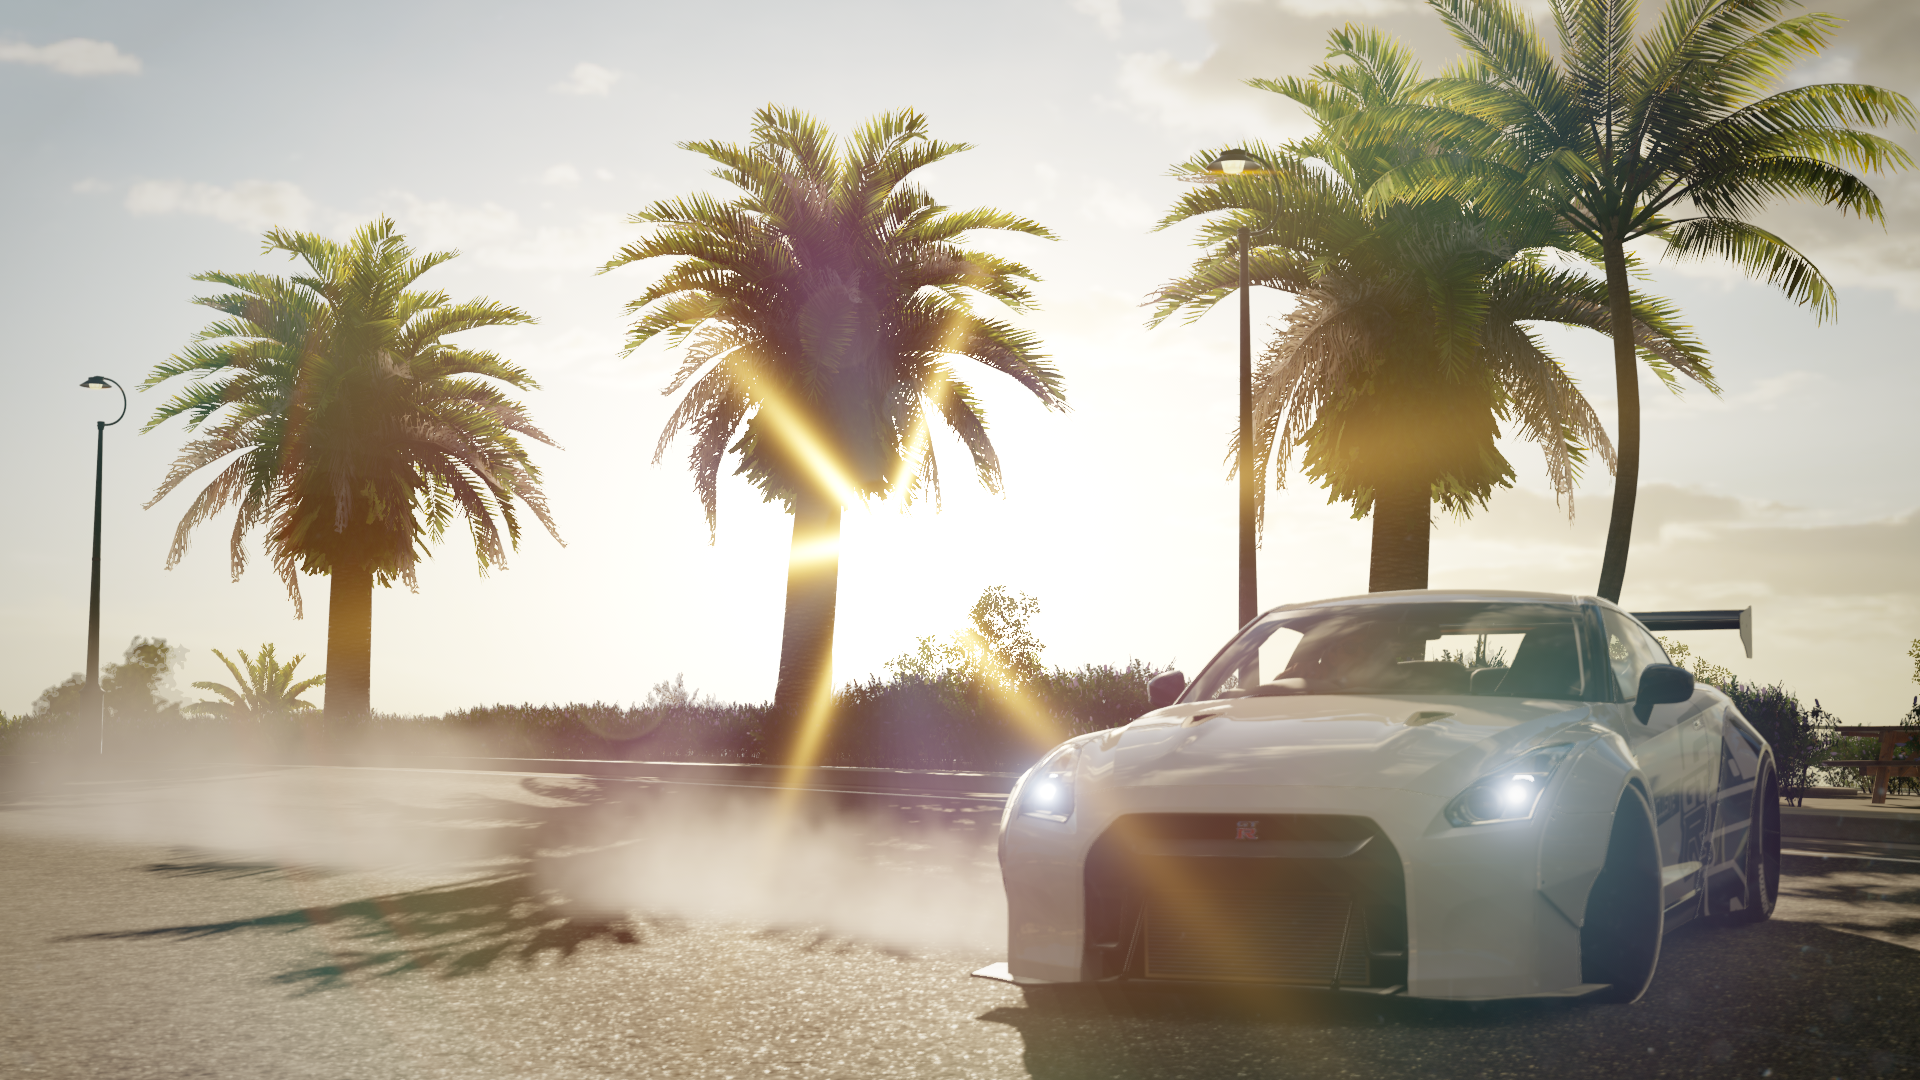 General 1920x1080 Forza Horizon 3 cinematic car video games Nissan Nissan GT-R Japanese cars